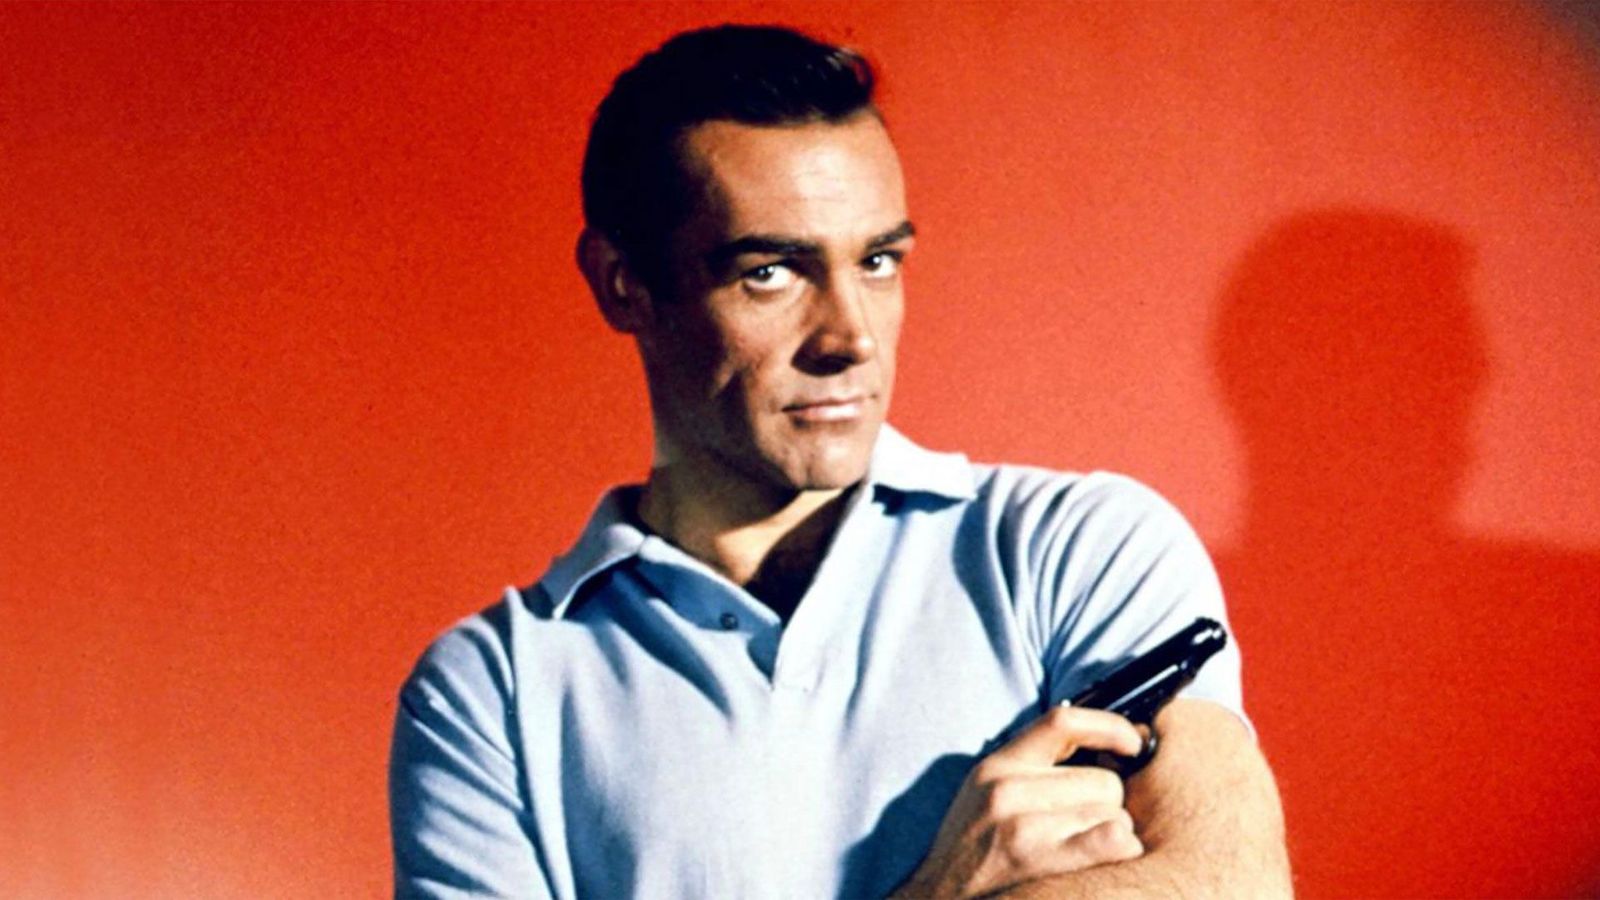 Sean Connery's tough-guy James Bond was very different from the secret agent imagined in Ian Fleming's novels (Credit: Alamy)